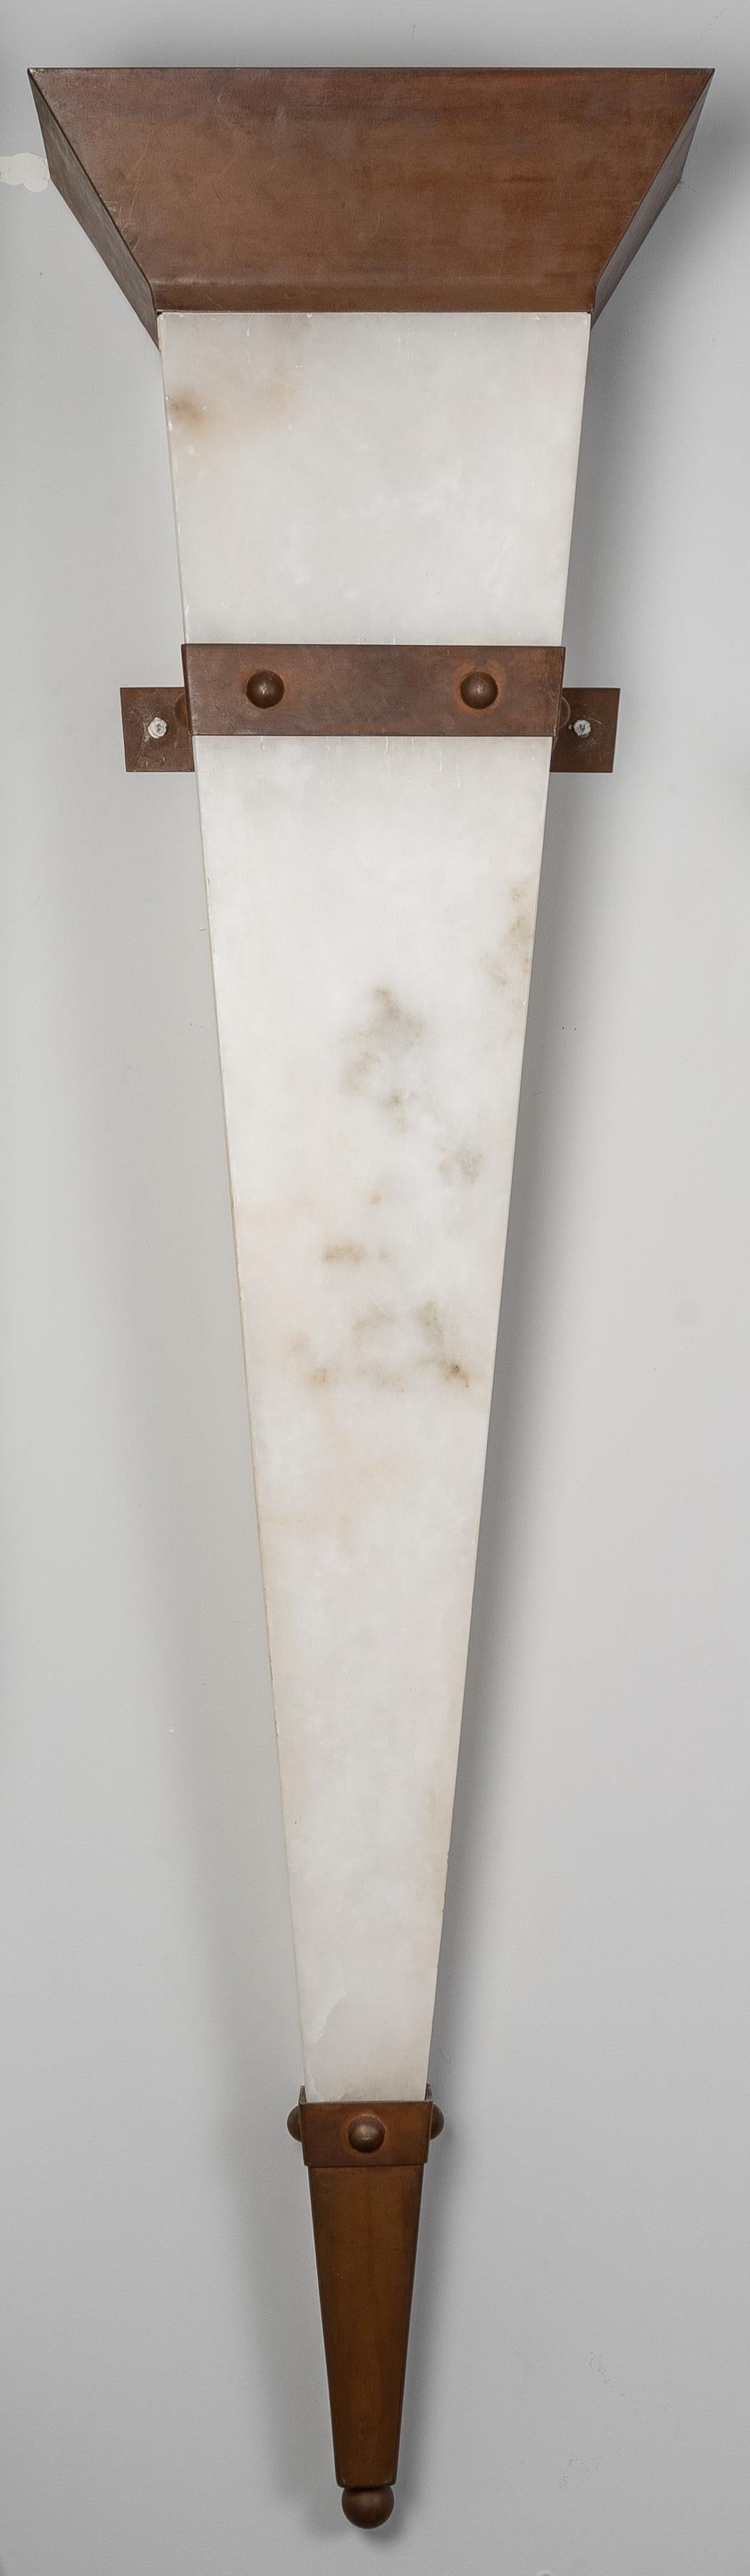 Christian Caudron, Large Contemporary Sconce, Alabaster, Fixings in Corten Steel For Sale 6